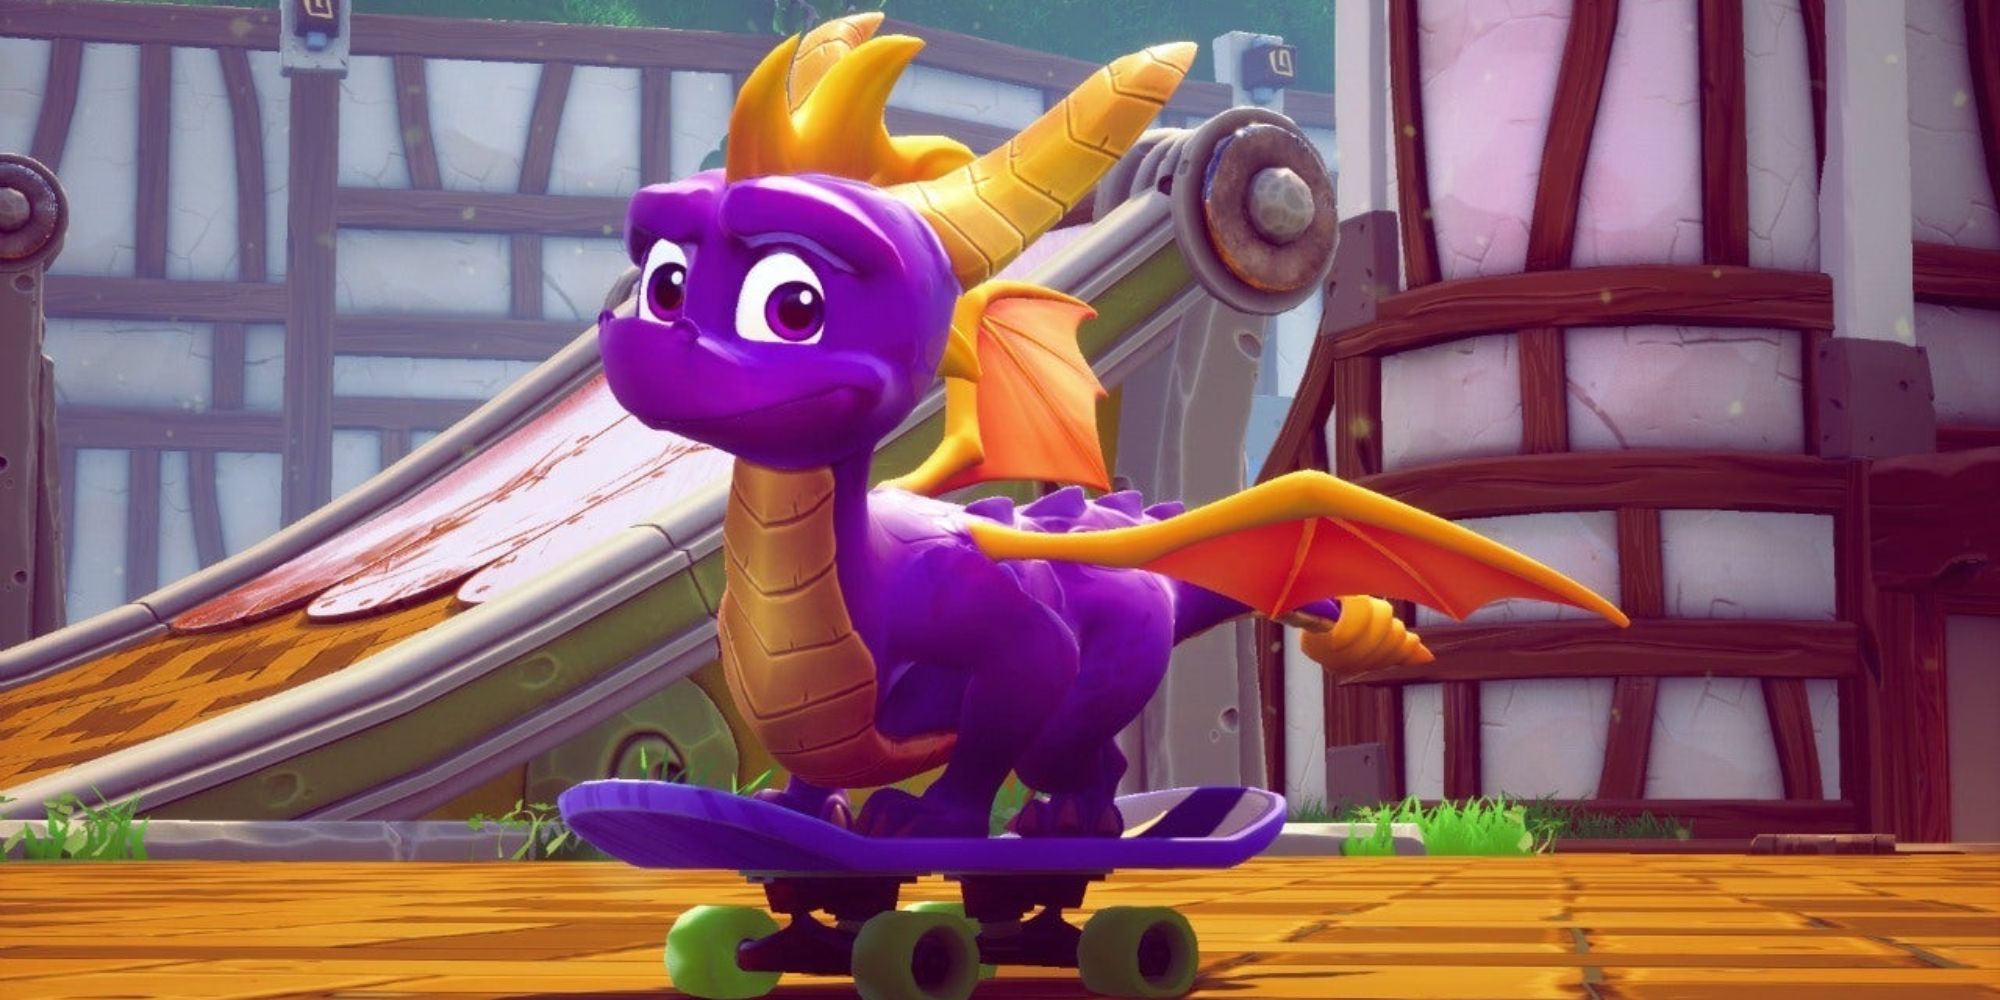 Spyro rides a skateboard in Year of the Dragon.